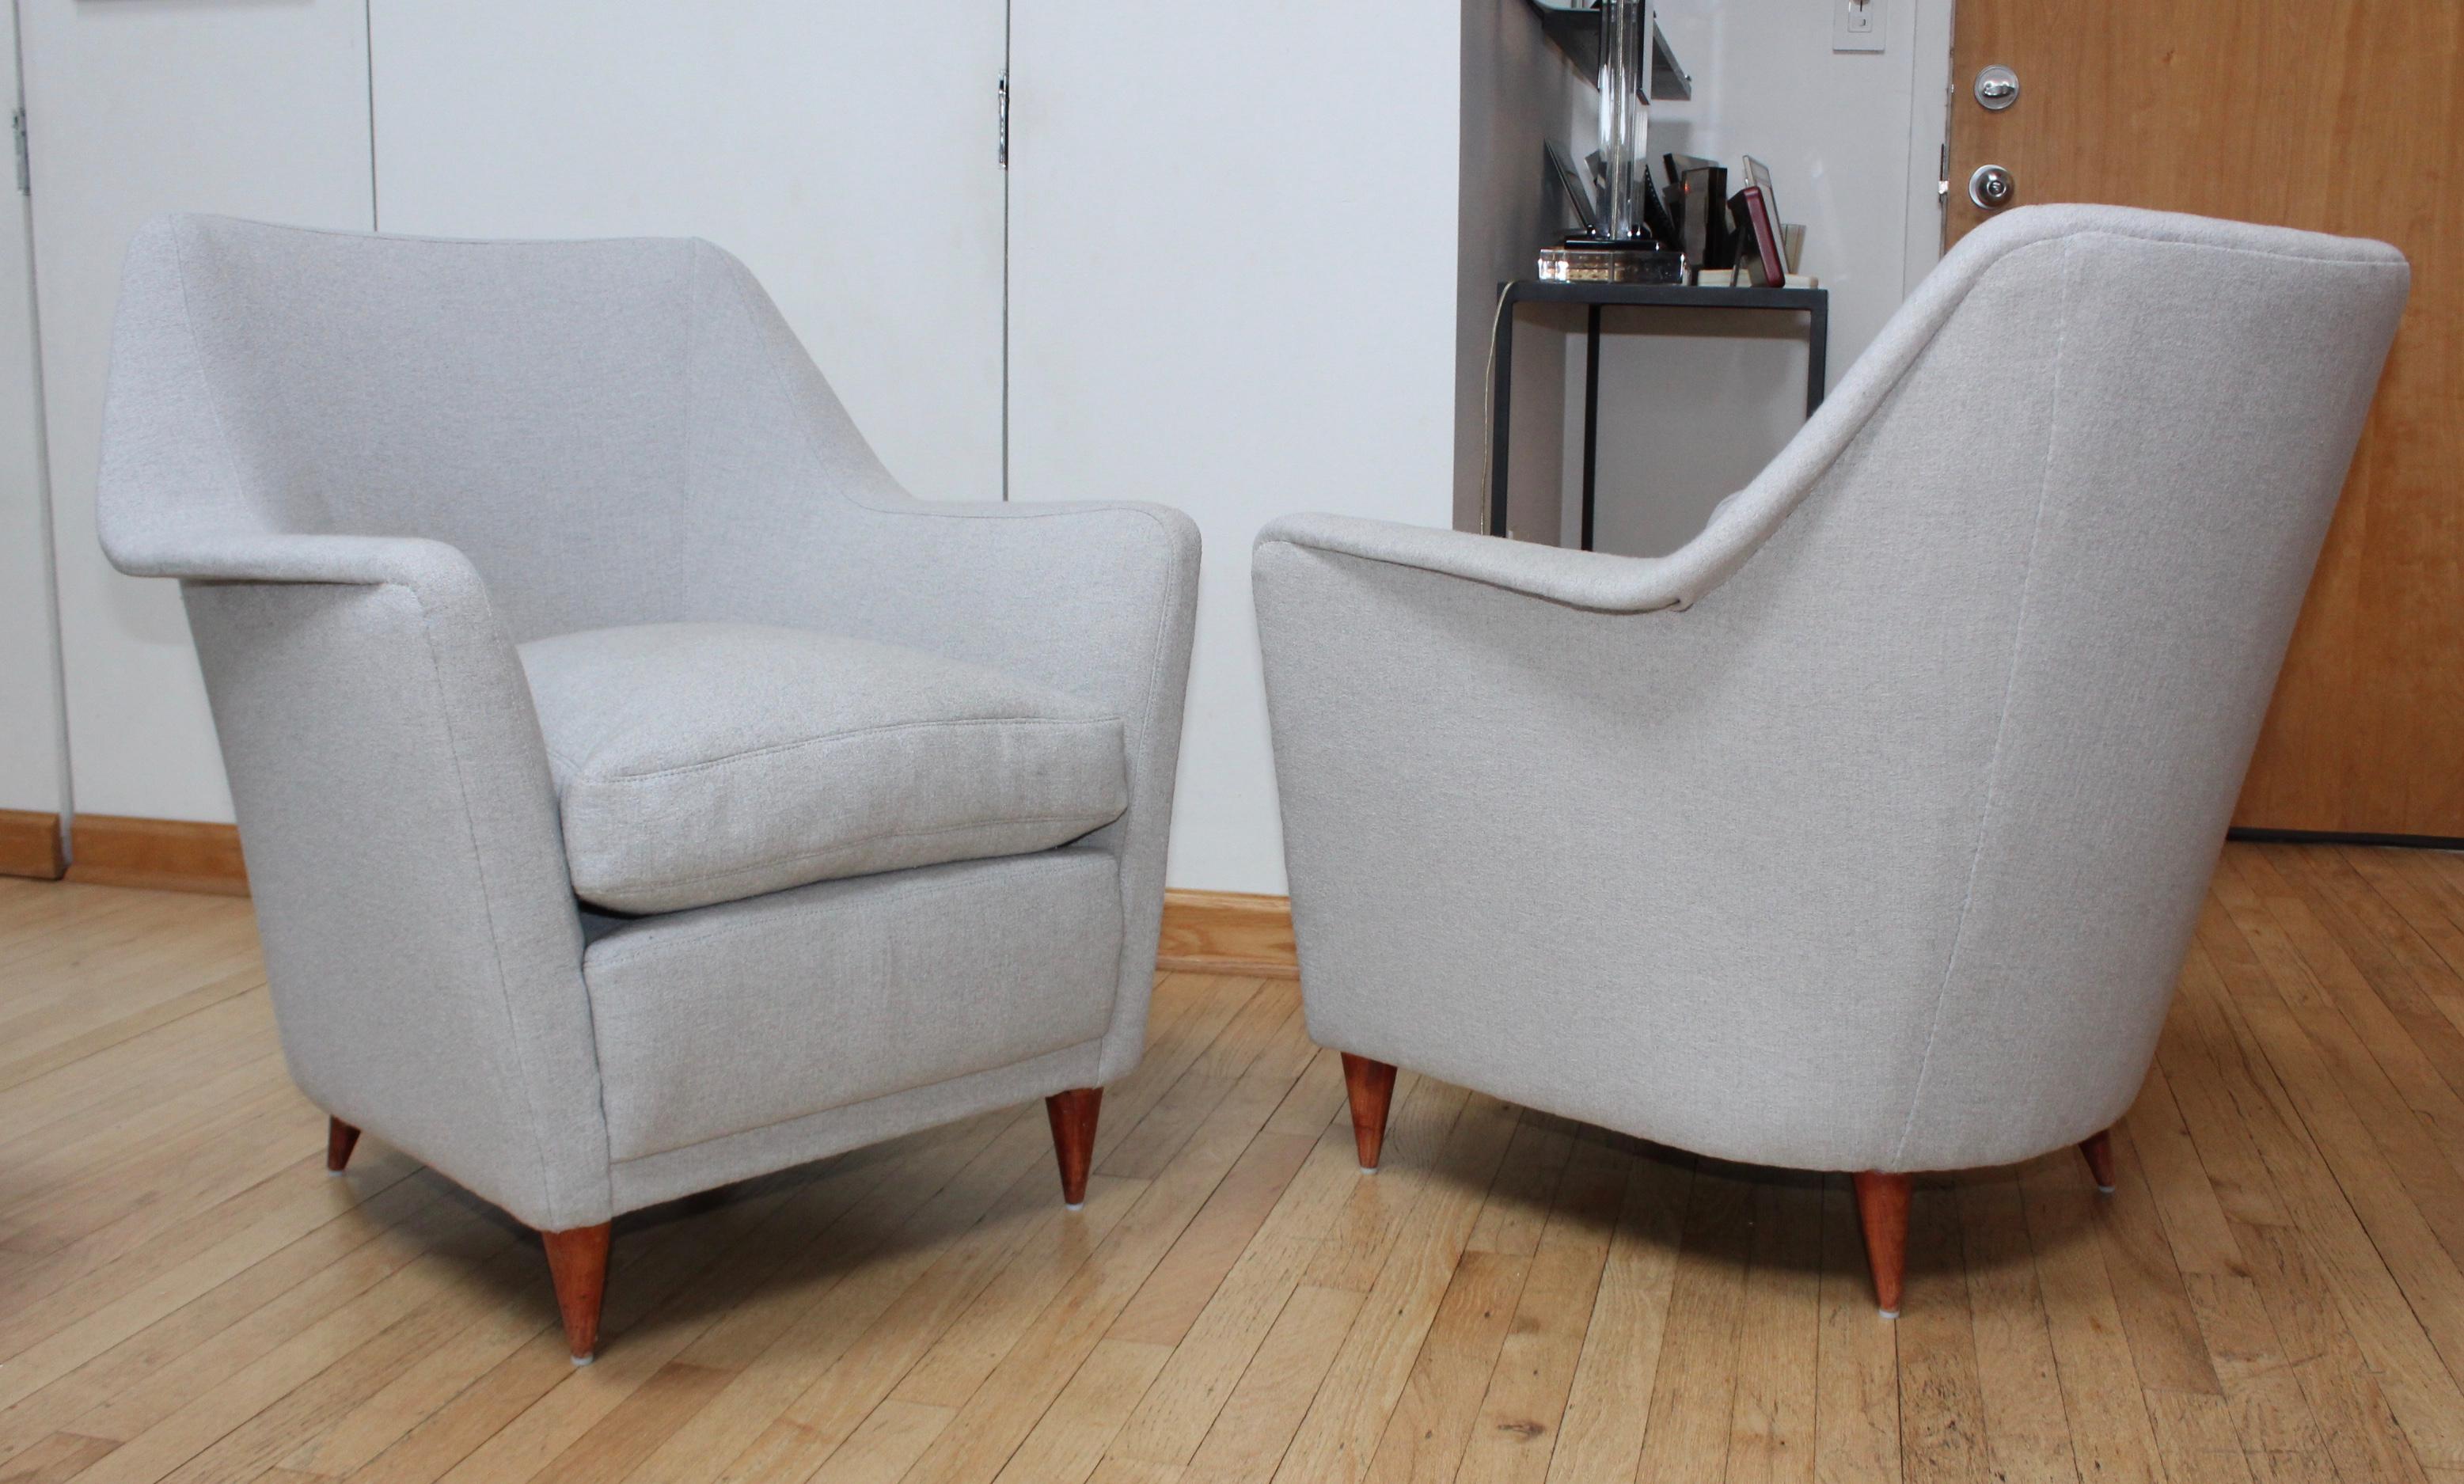 Stunning pair of 1950s Carlo de Carli style Italian lounge chairs. They were reupholstered 1 years ago with feather down seats.